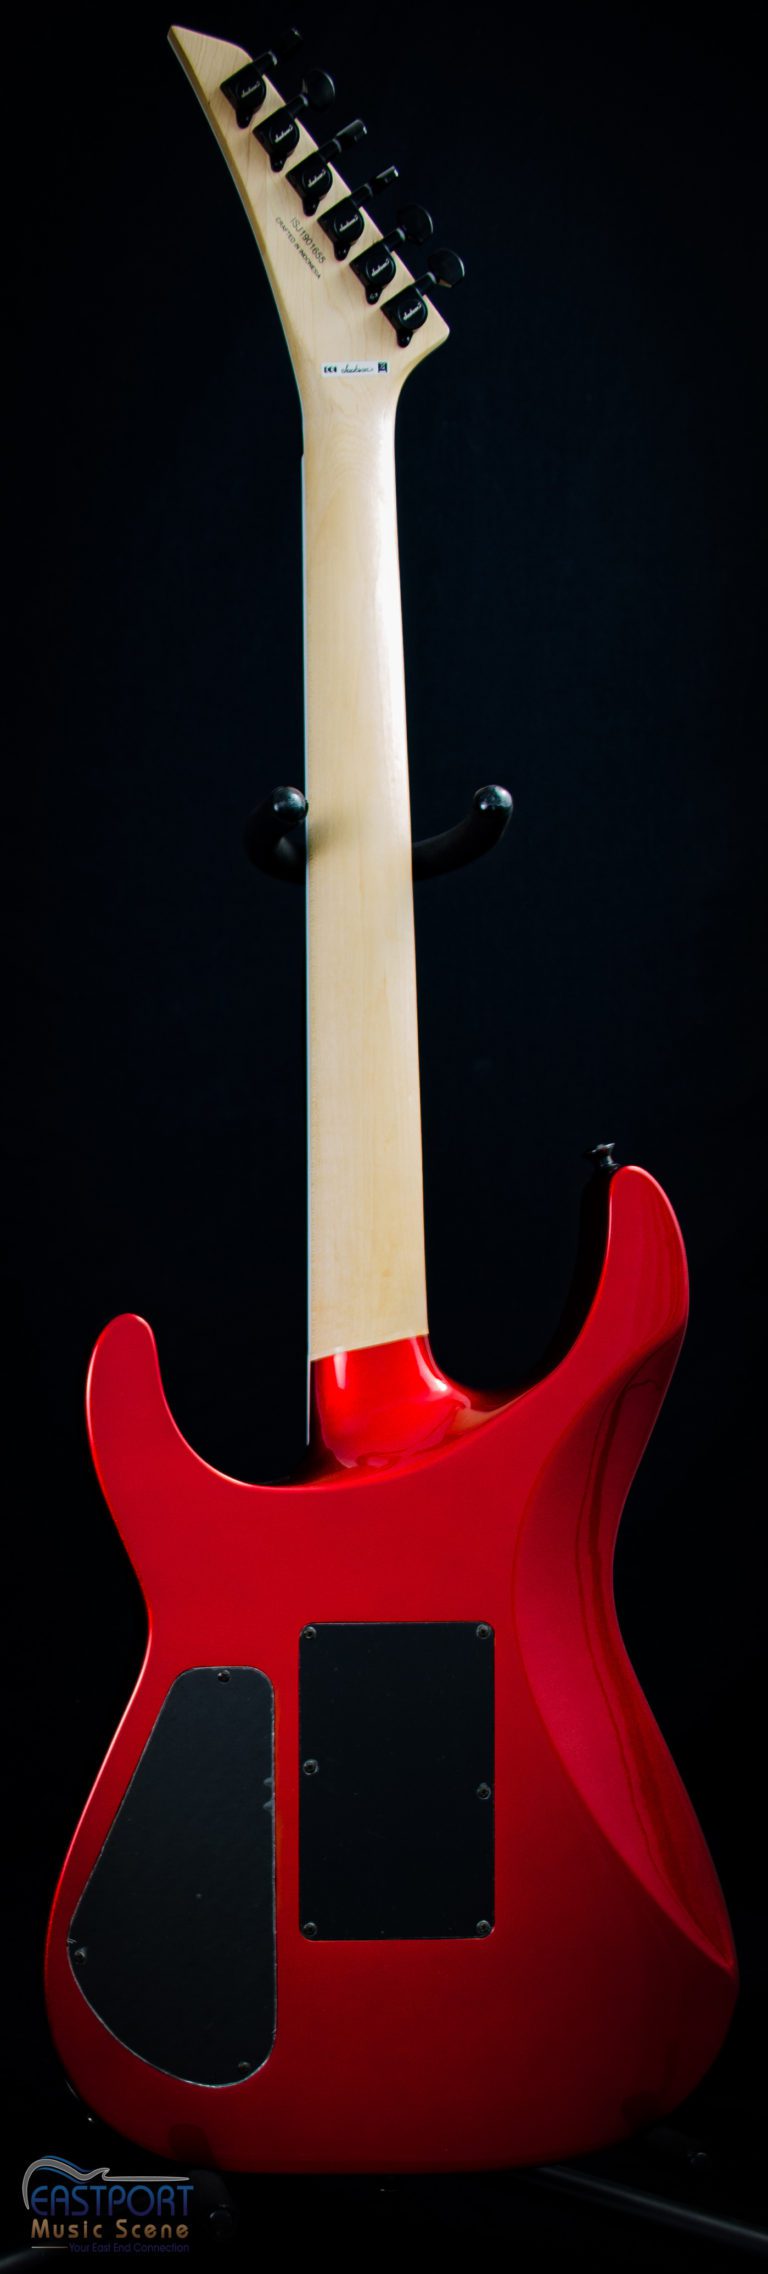 A red guitar with a white handle and black head.